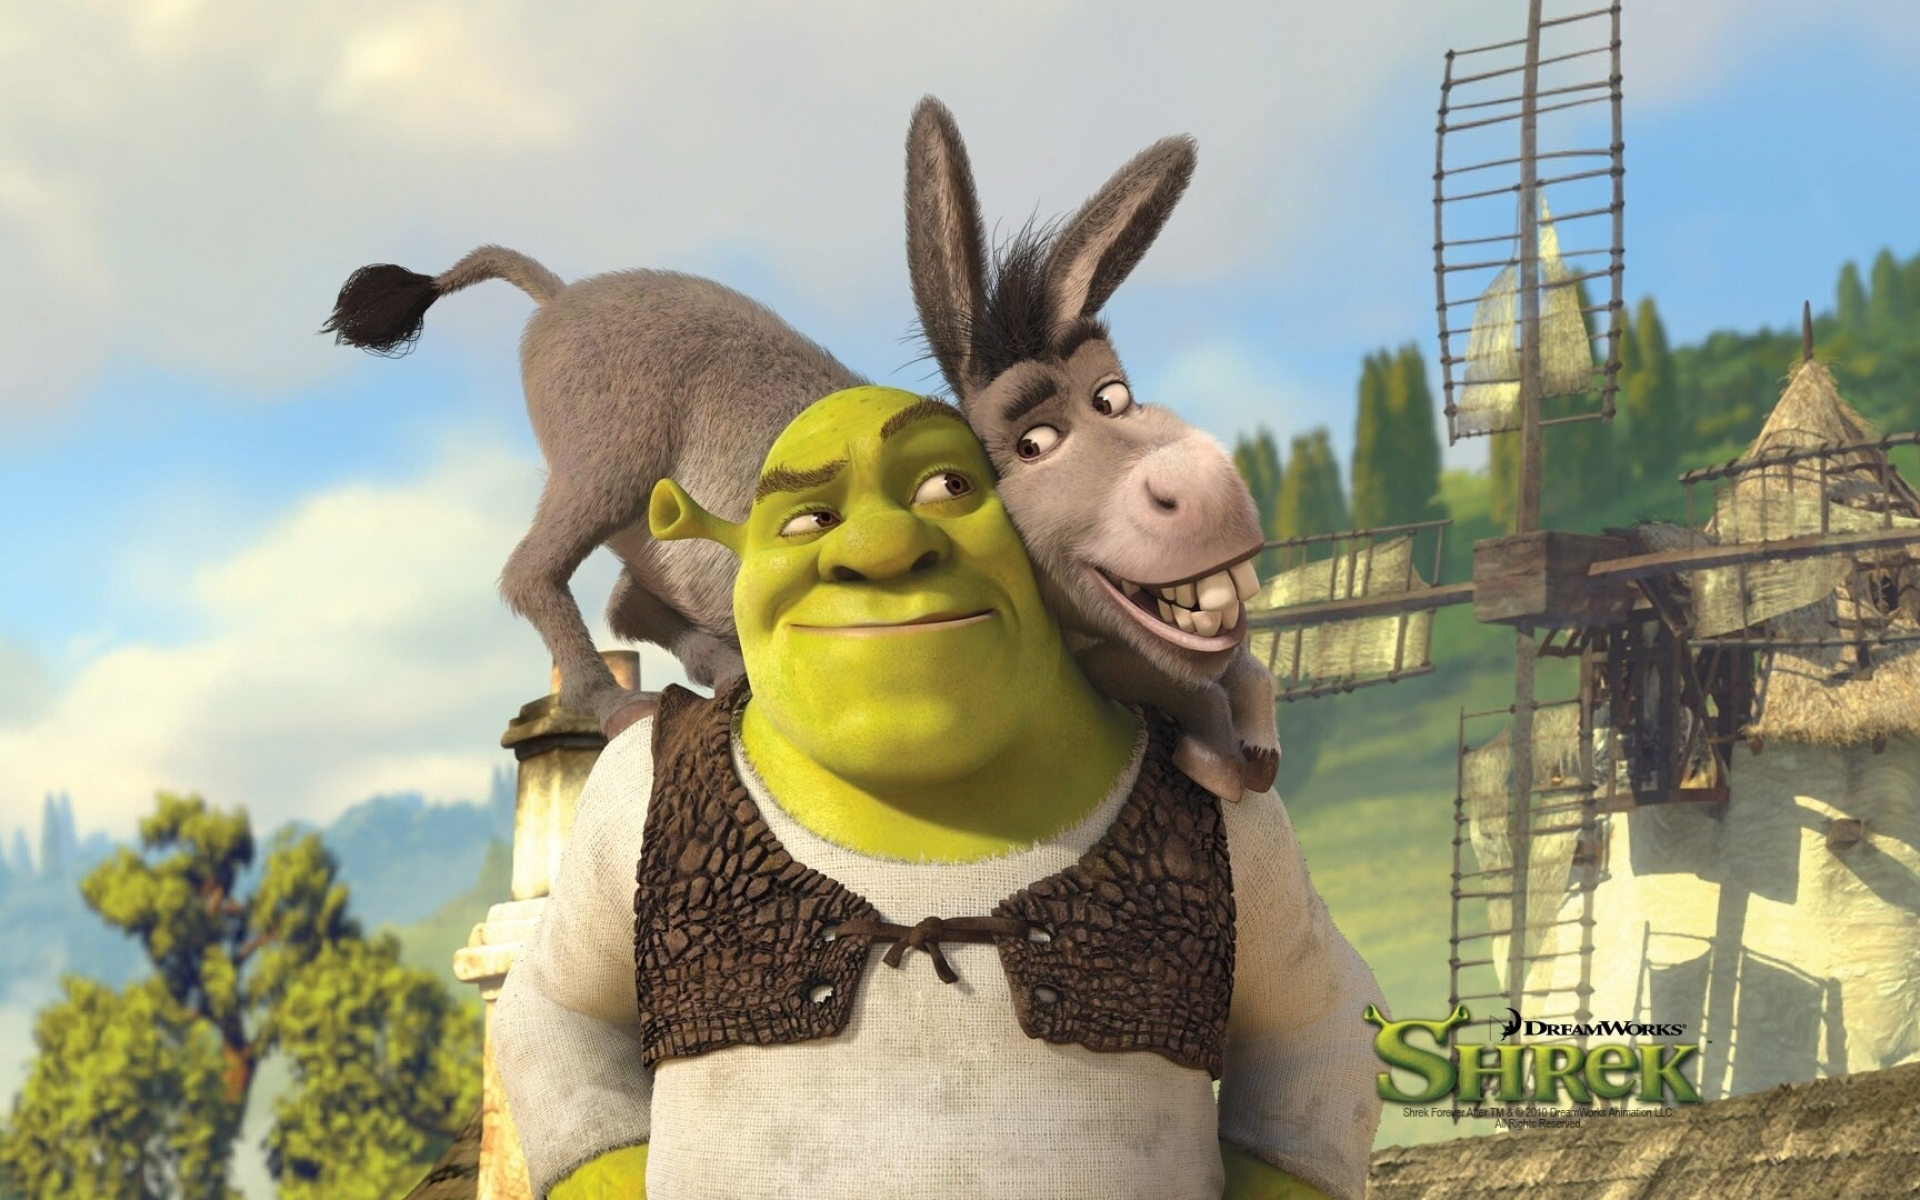 Shrek: A 2001 American computer-animated comedy film loosely based on the 1990 book of the same name by William Steig. 1920x1200 HD Background.